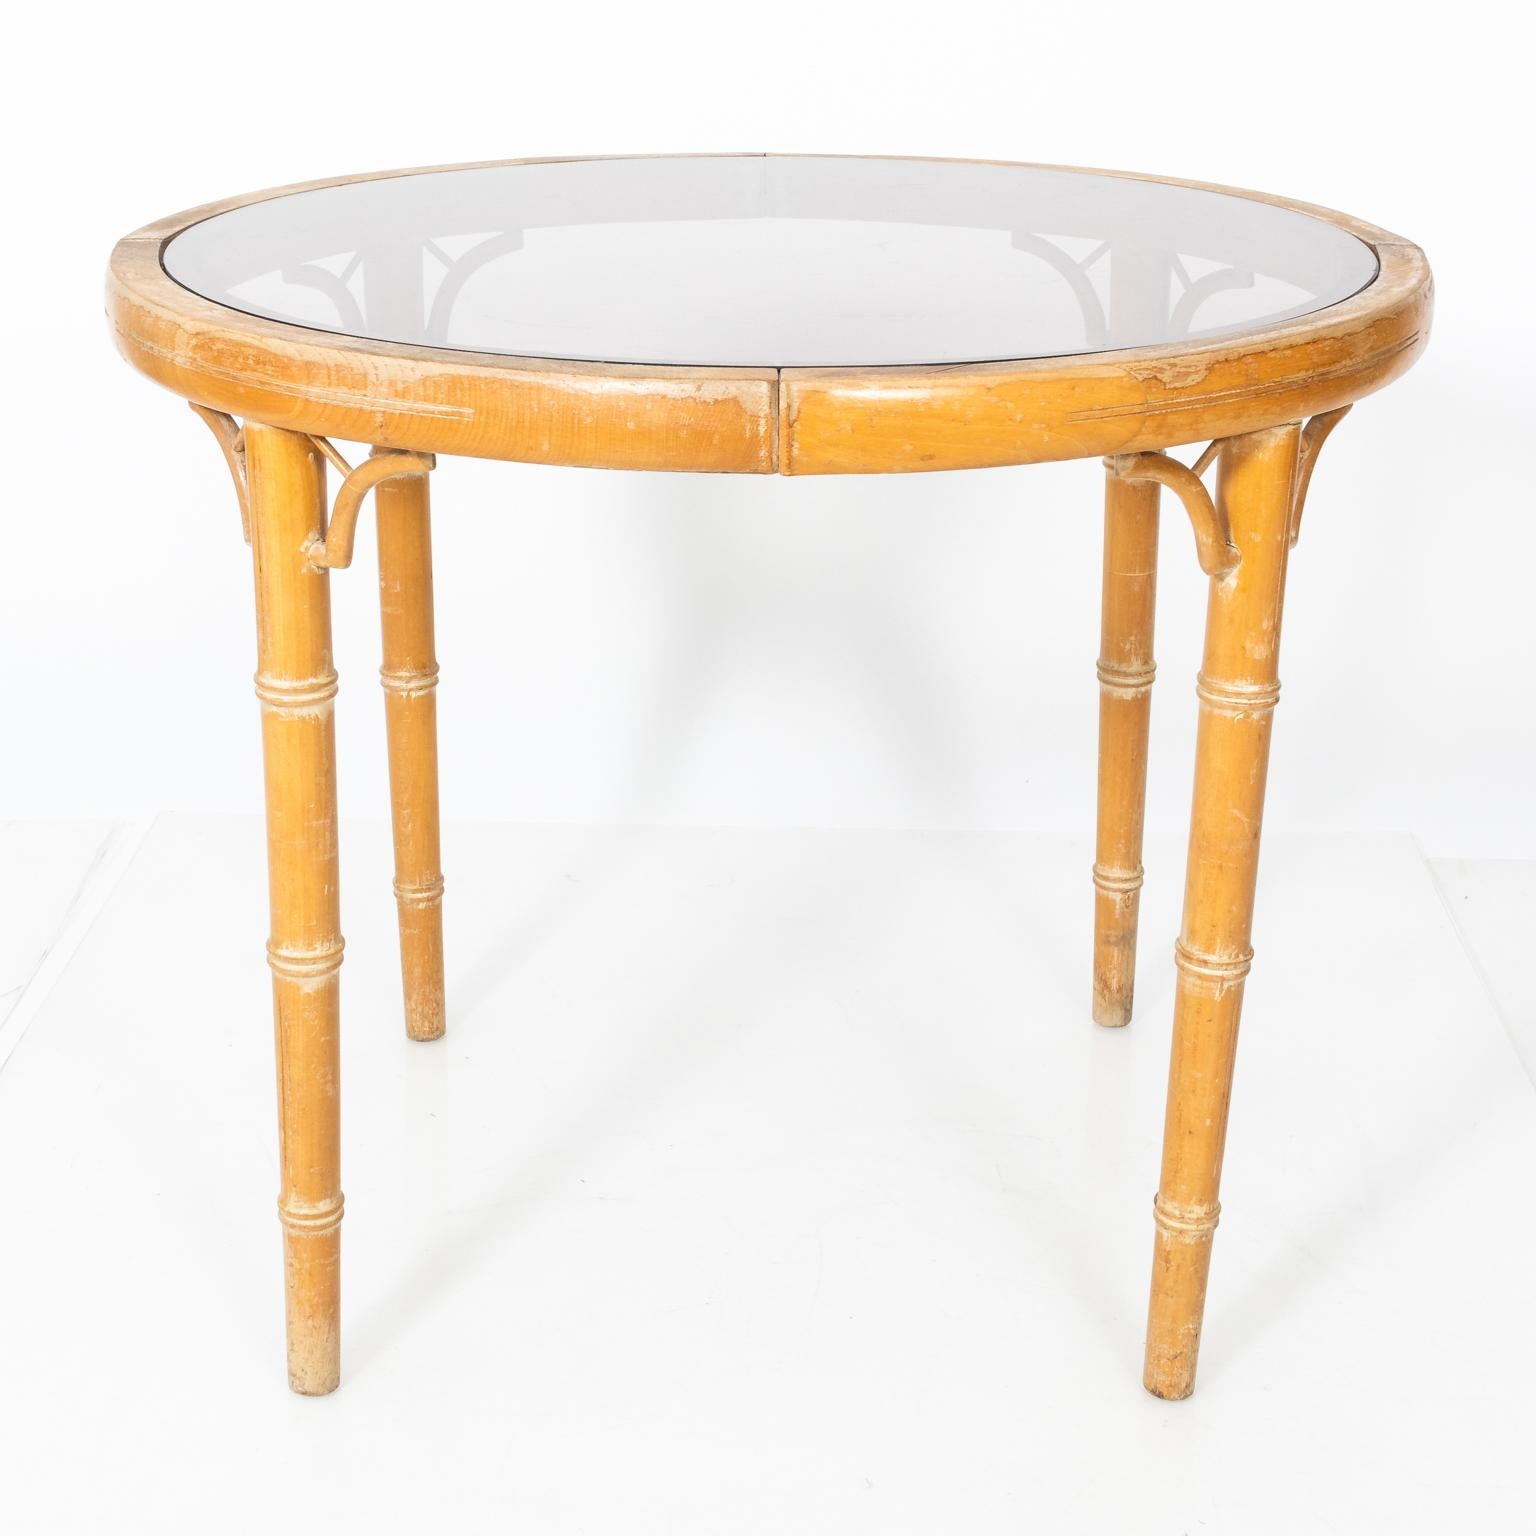 French faux bamboo table with smokey glass top, circa 19th century. Please note of wear consistent with age including scratches and wear to the finish. There is also a crack on the rim of the tabletop.